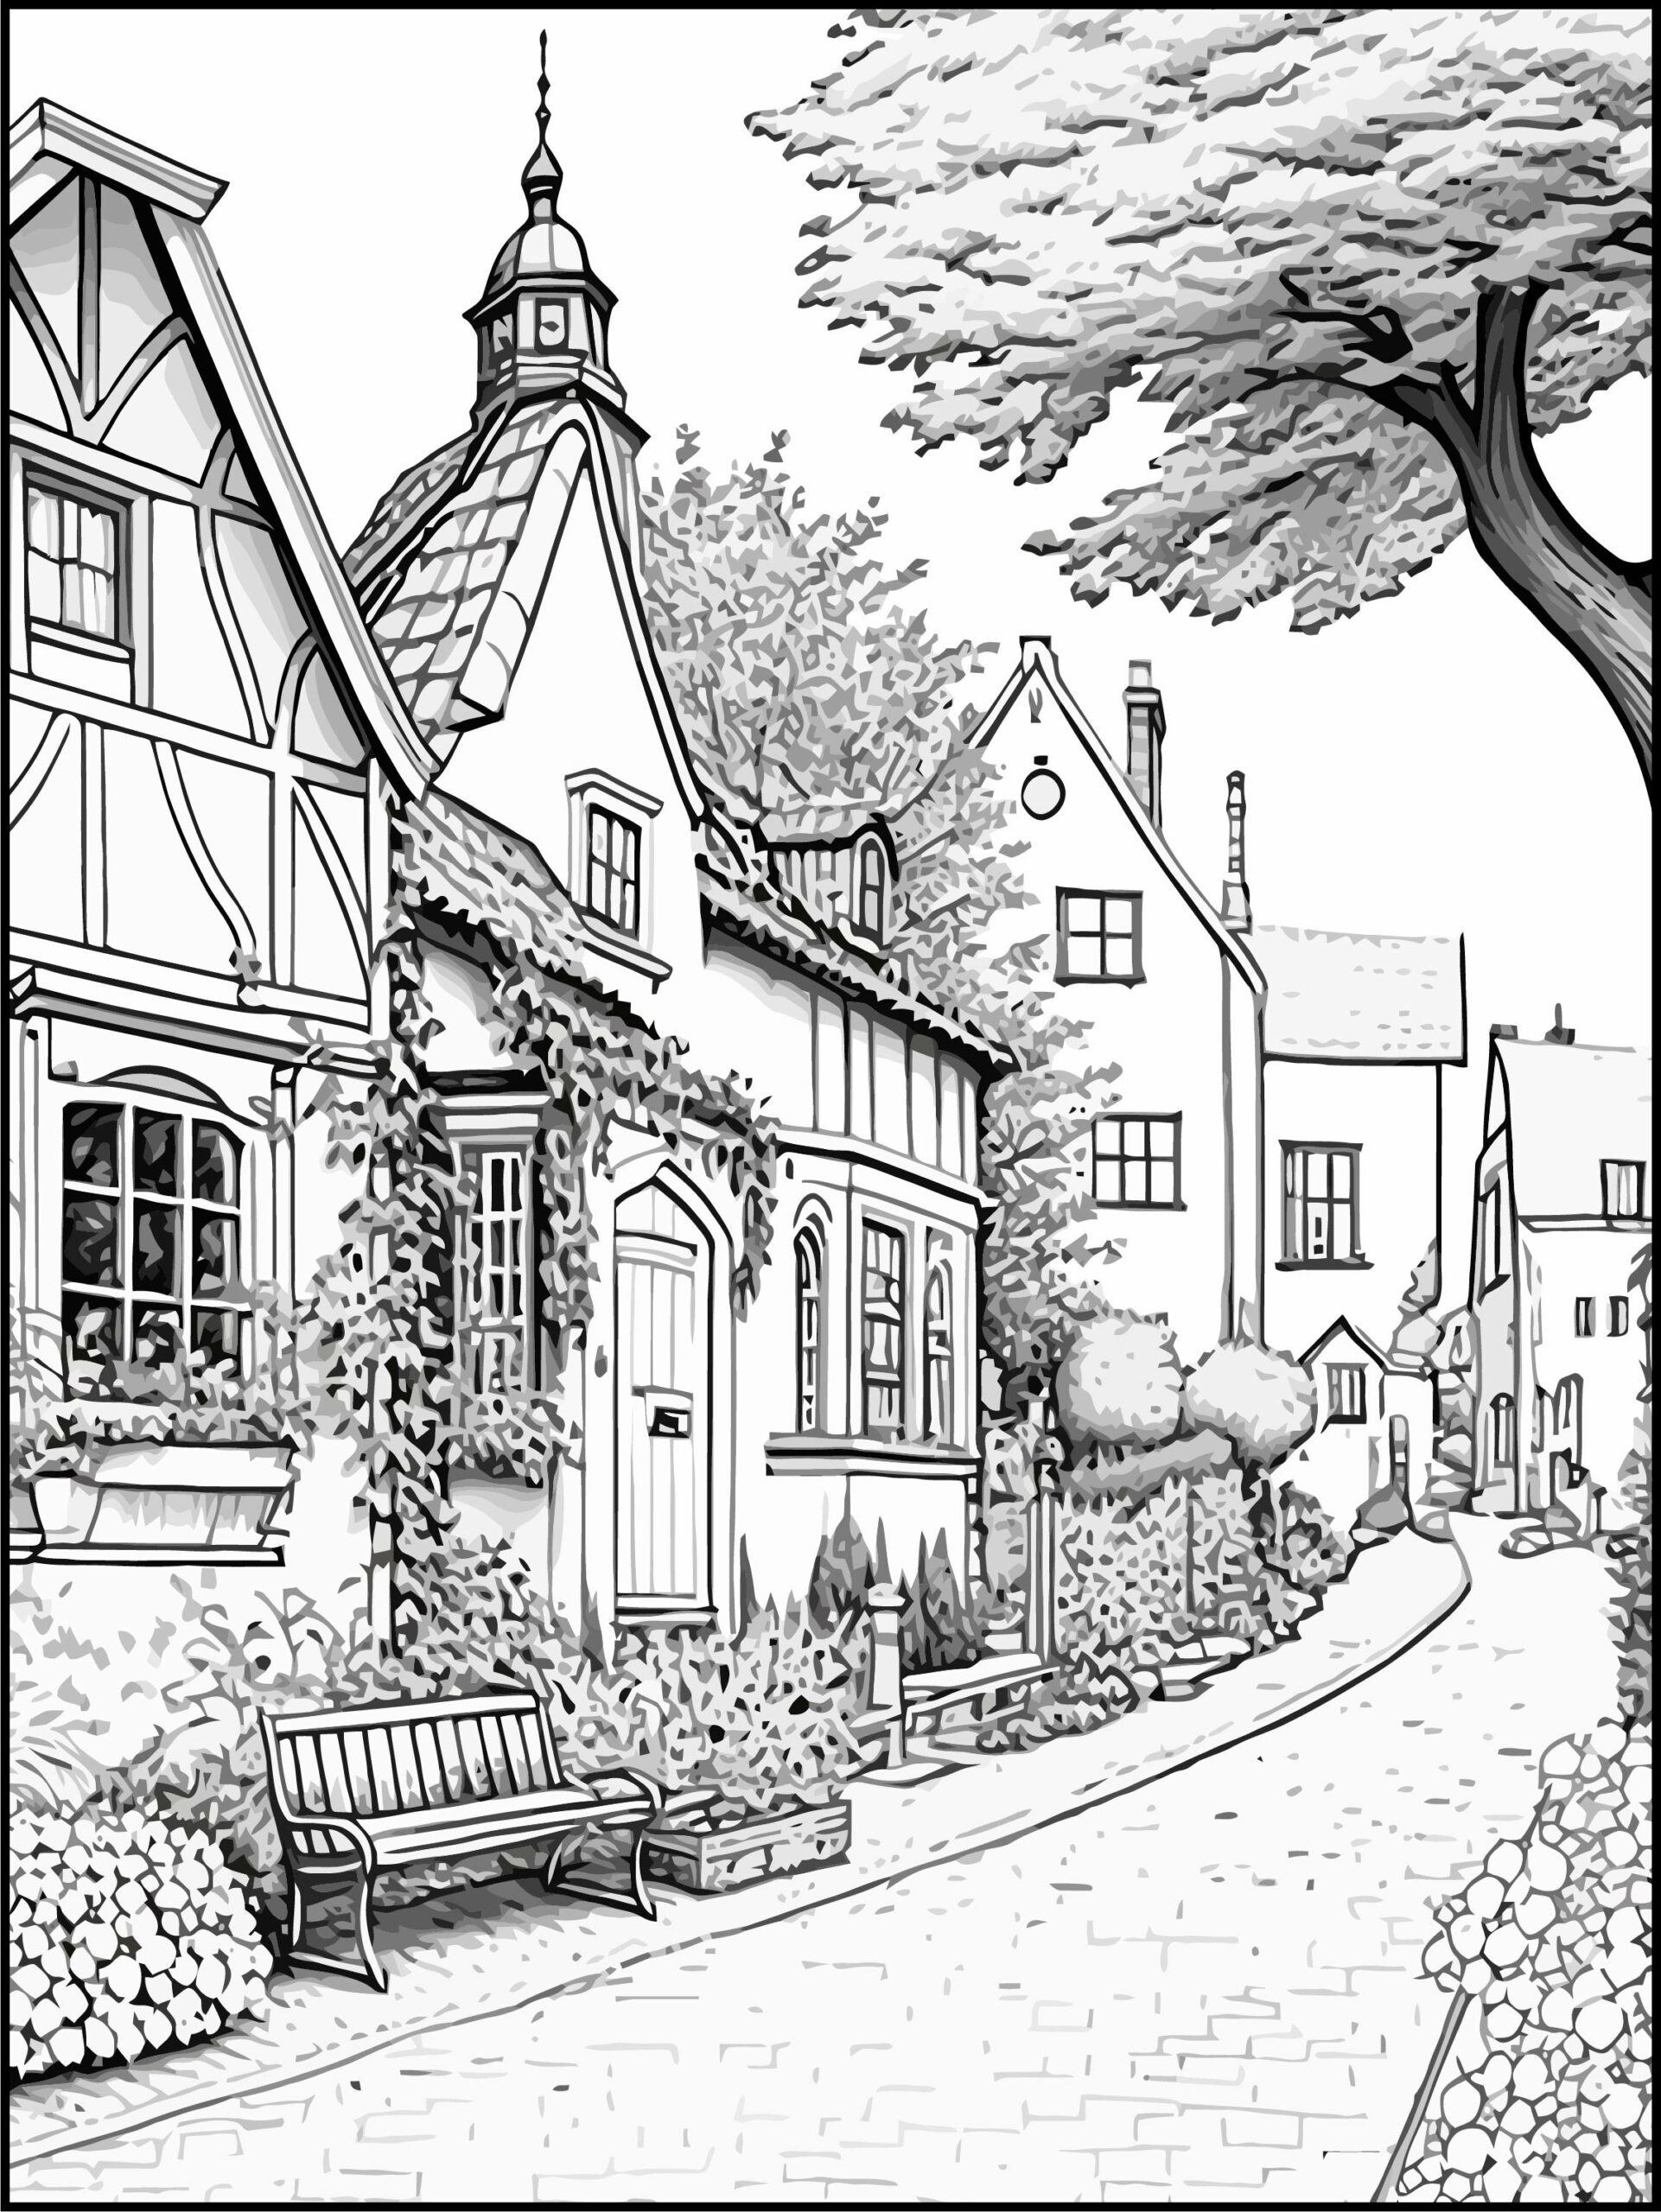 Discover the magic of the village a charming coloring book made by teachers